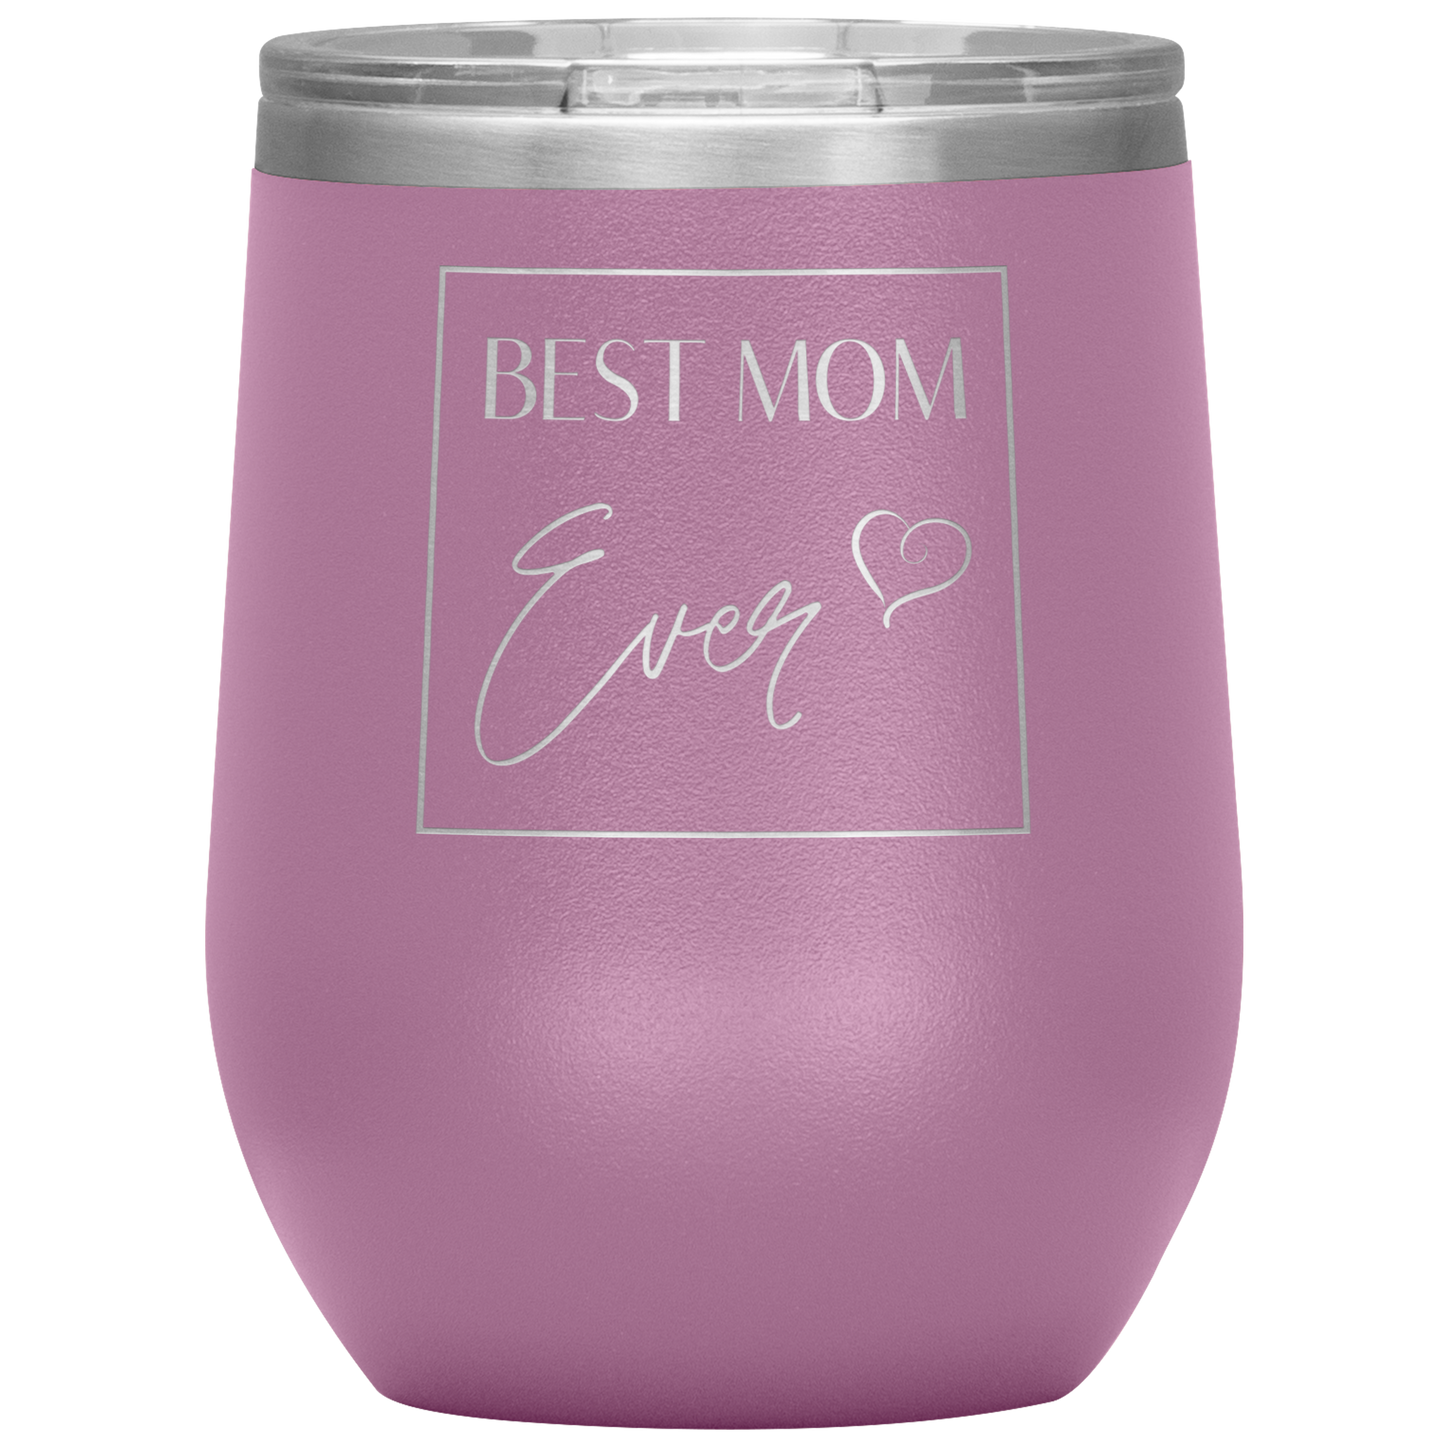 "Best Mom Ever" 12 oz. Insulated Stainless Steel Wine Tumbler with Lid